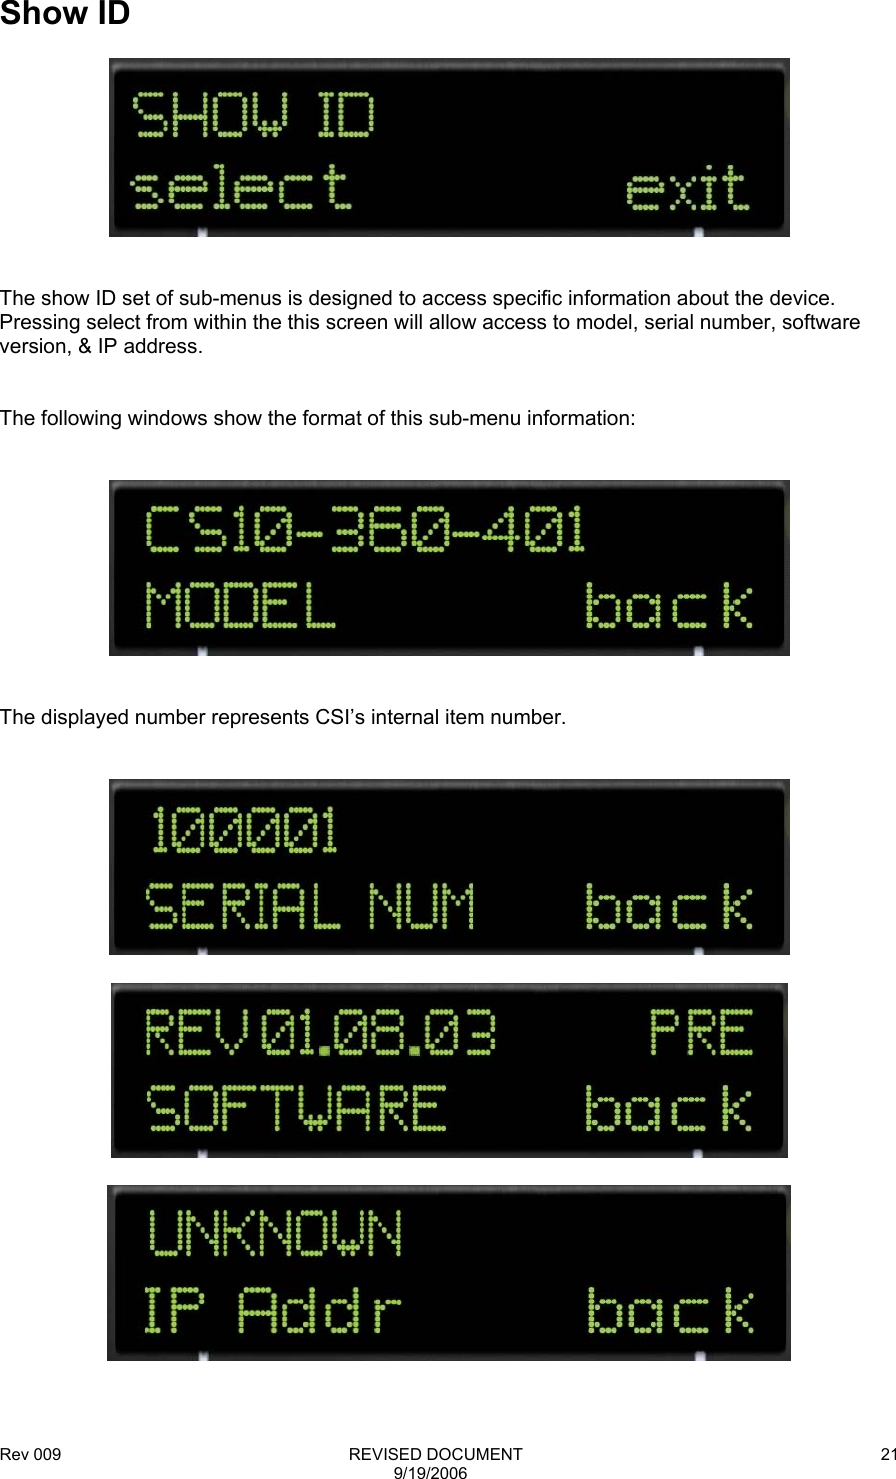 Rev 009                                                              REVISED DOCUMENT 9/19/2006 21  Show ID     The show ID set of sub-menus is designed to access specific information about the device.  Pressing select from within the this screen will allow access to model, serial number, software version, &amp; IP address.   The following windows show the format of this sub-menu information:      The displayed number represents CSI’s internal item number.         